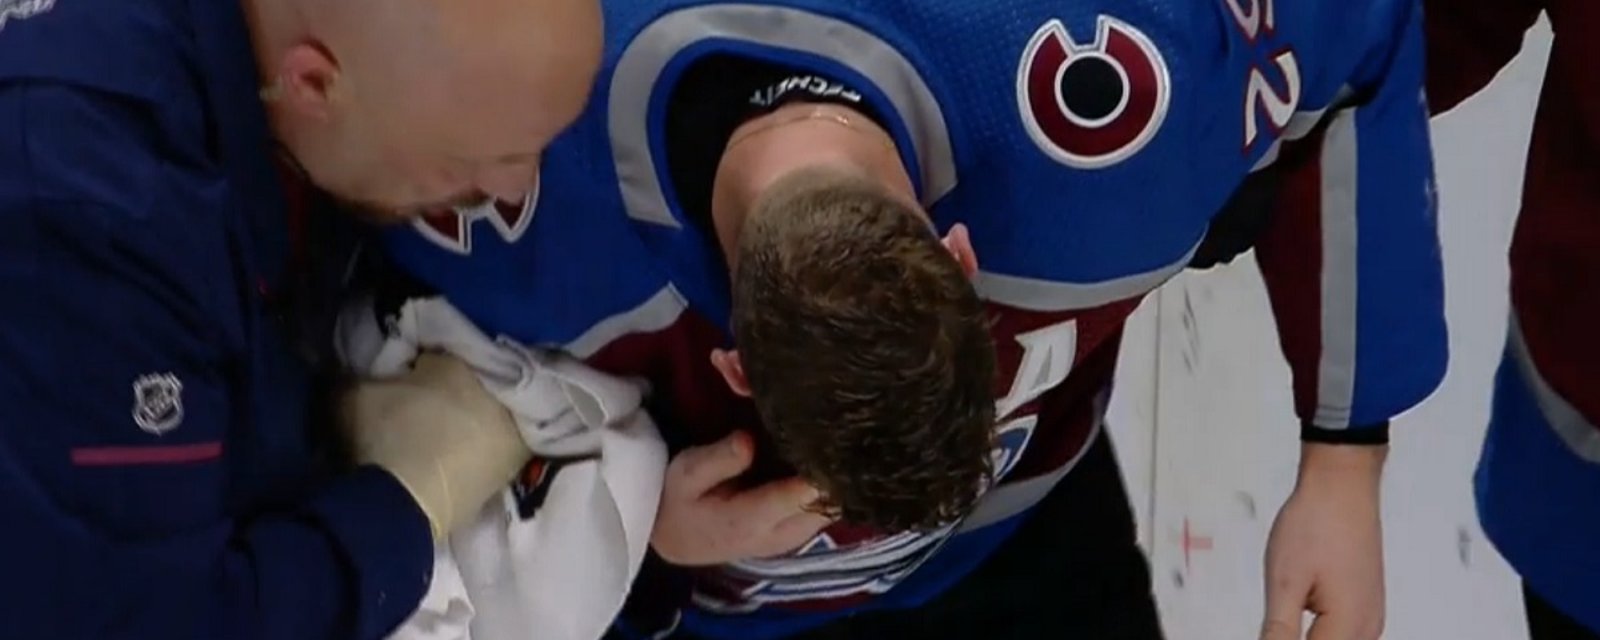 Breaking: Former first round pick helped off the ice after taking a stick to the eye.